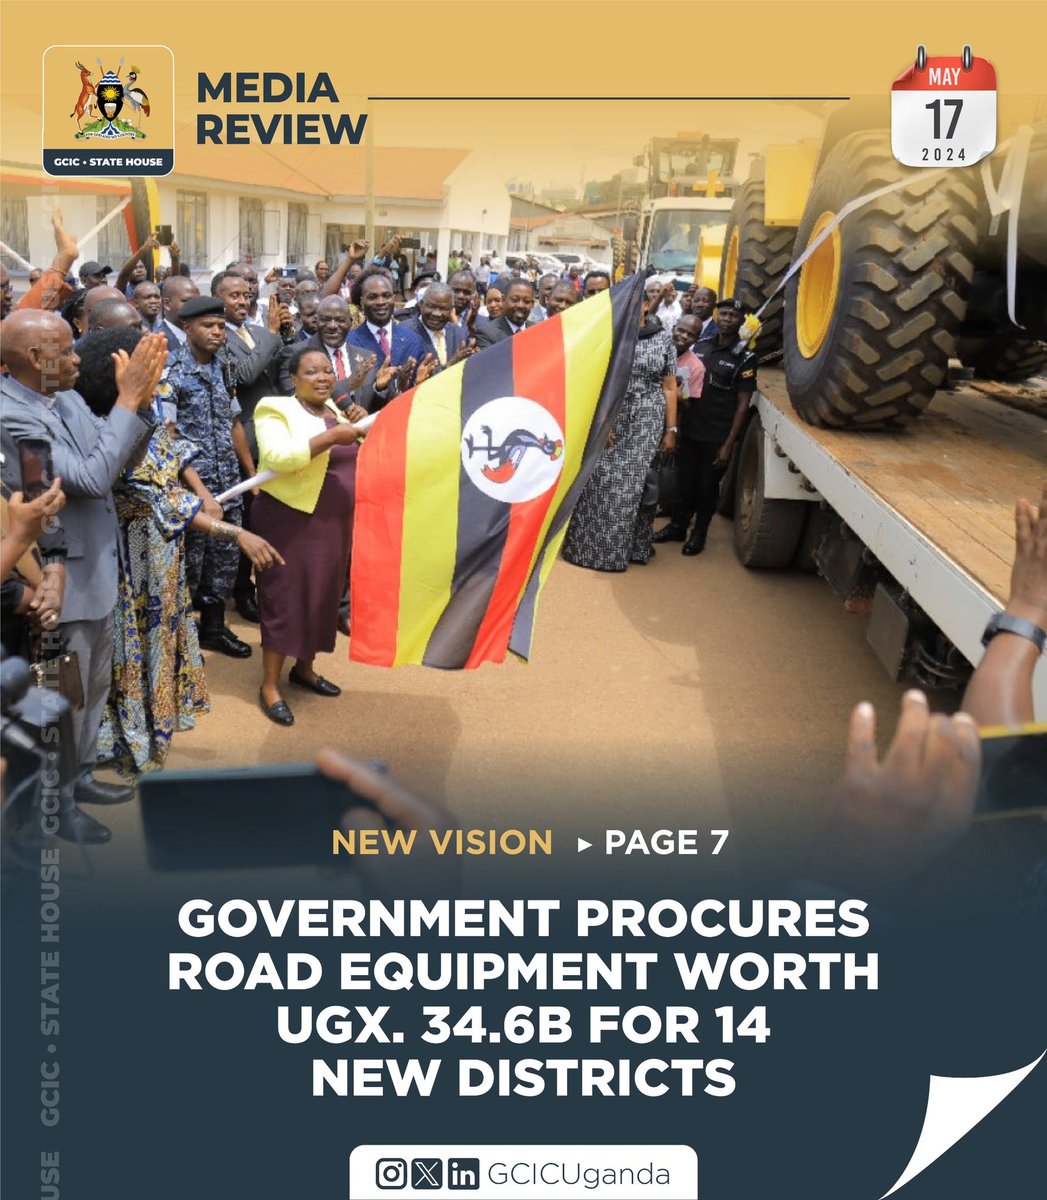 The Prime Minister, Hon. Robinah Nabbanja, has handed over road equipment to 14 new districts to enable them to maintain community access roads. Link:media.gcic.go.ug/gcic-media-rev…